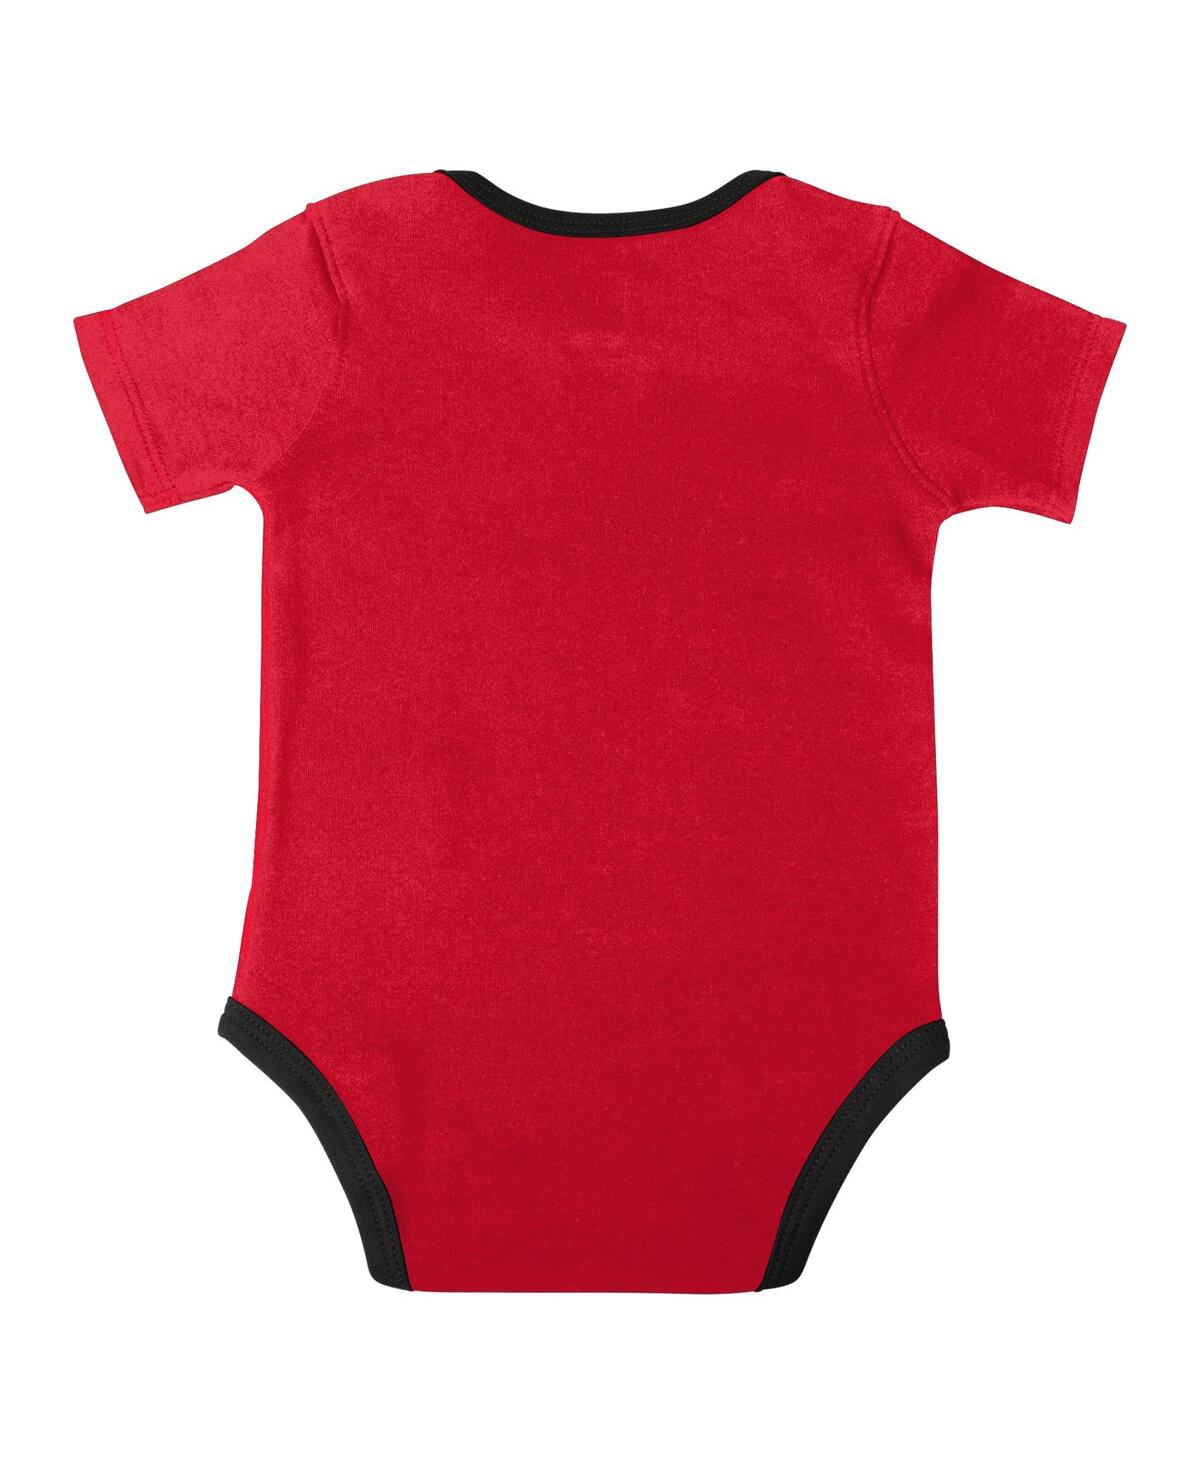 Shop Outerstuff Baby Boys And Girls Red, Black, Gray Chicago Bulls Bank Shot Bodysuit, Hoodie T-shirt And Shorts Set In Red,black